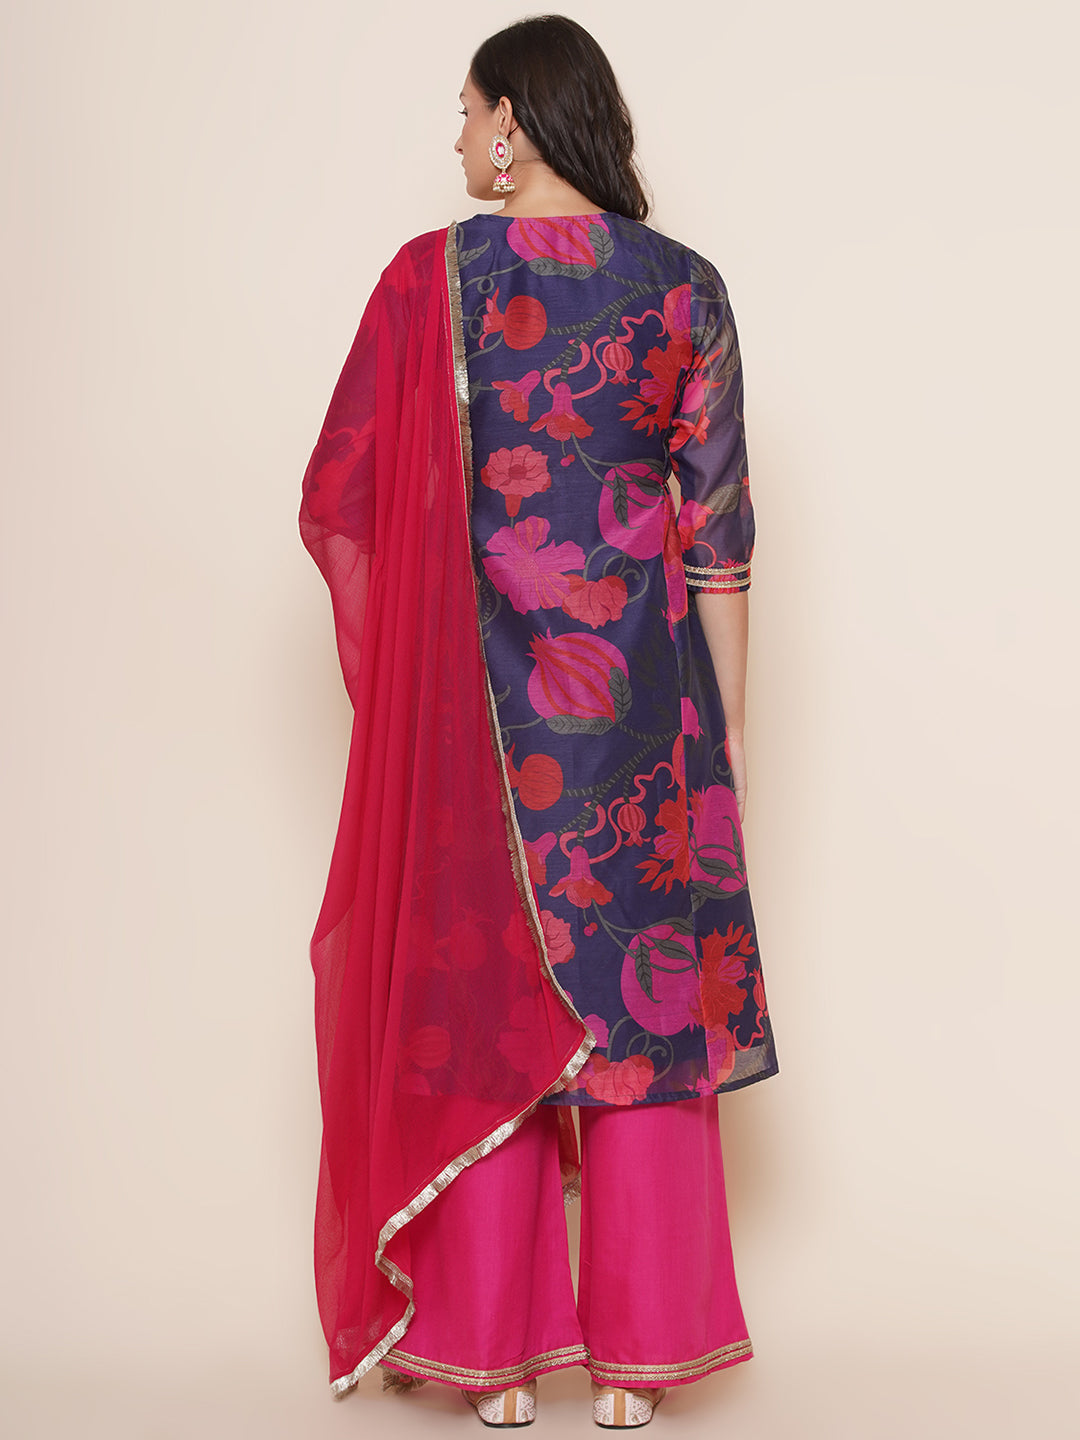 Bhama Couture Blue Pink Floral Print A-Line Yoke Embroidered Kurta & Pink Solid Plazzos With Dupatta